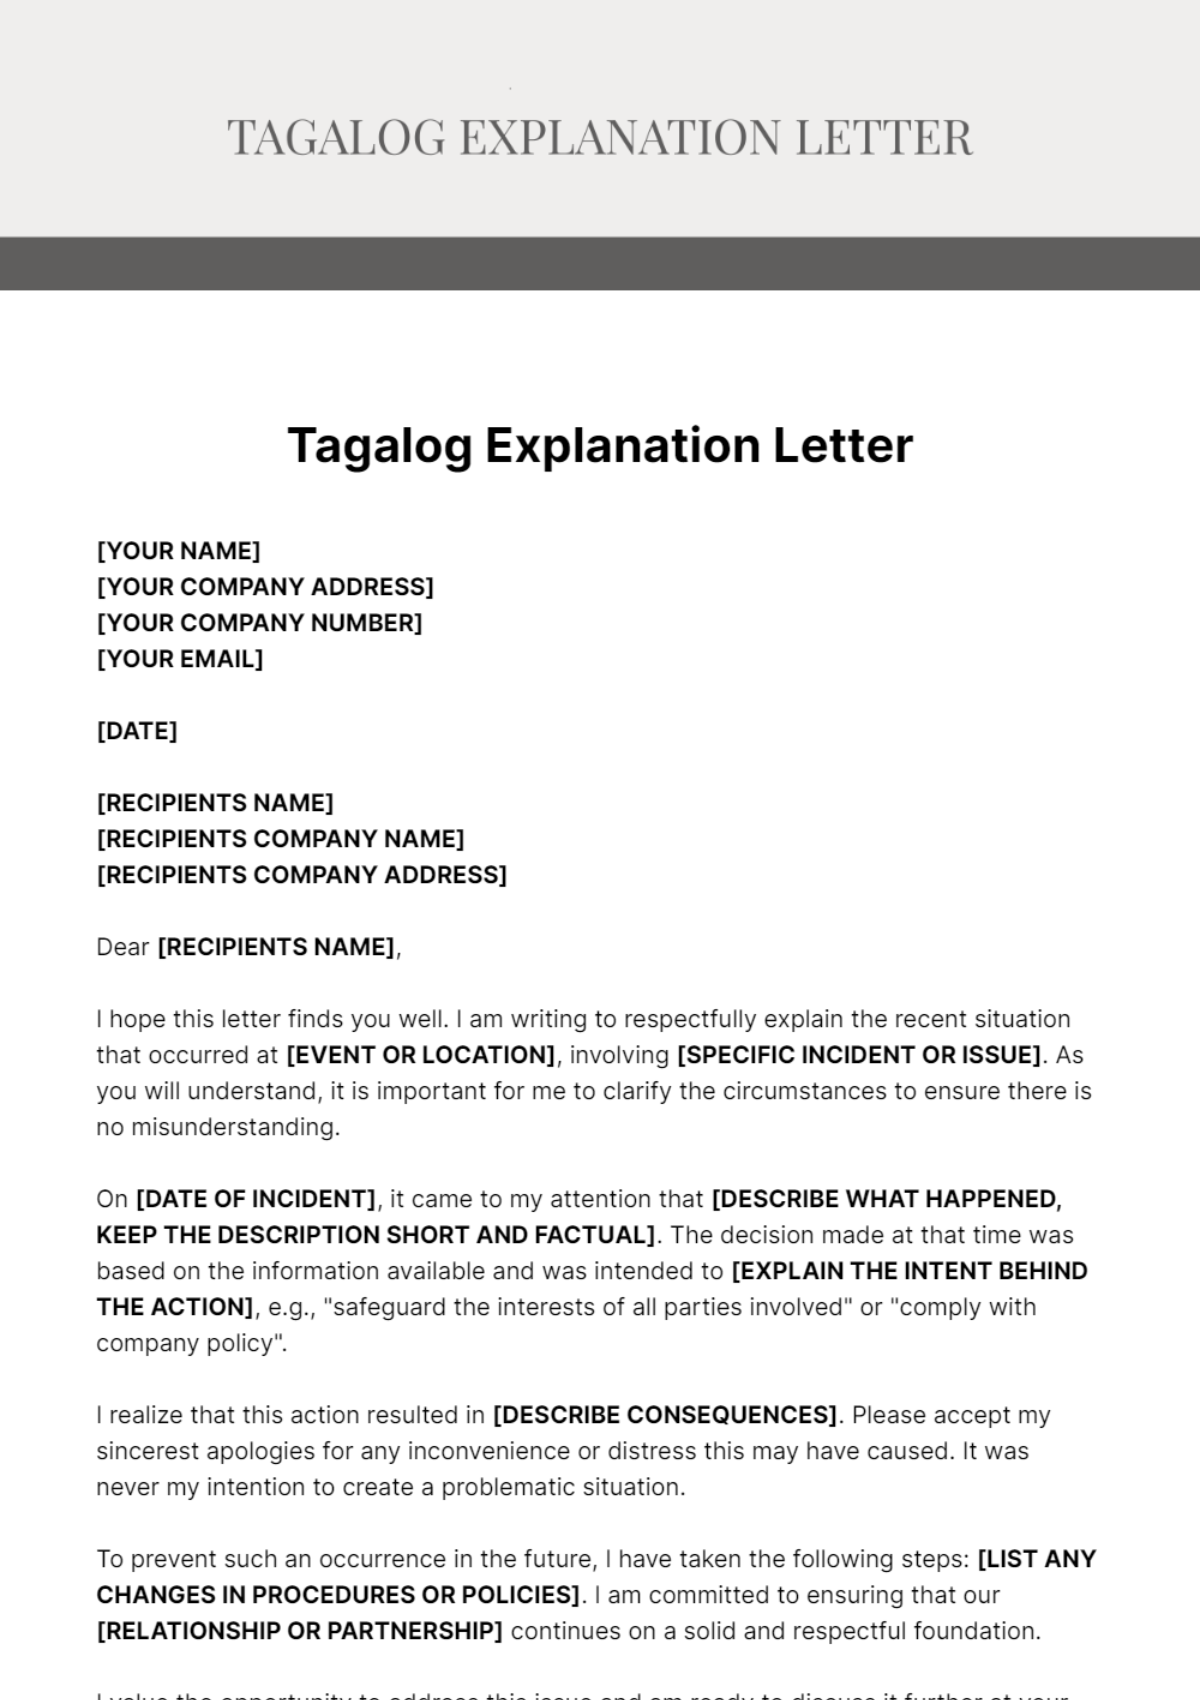 Tagalog Explanation Letter Template